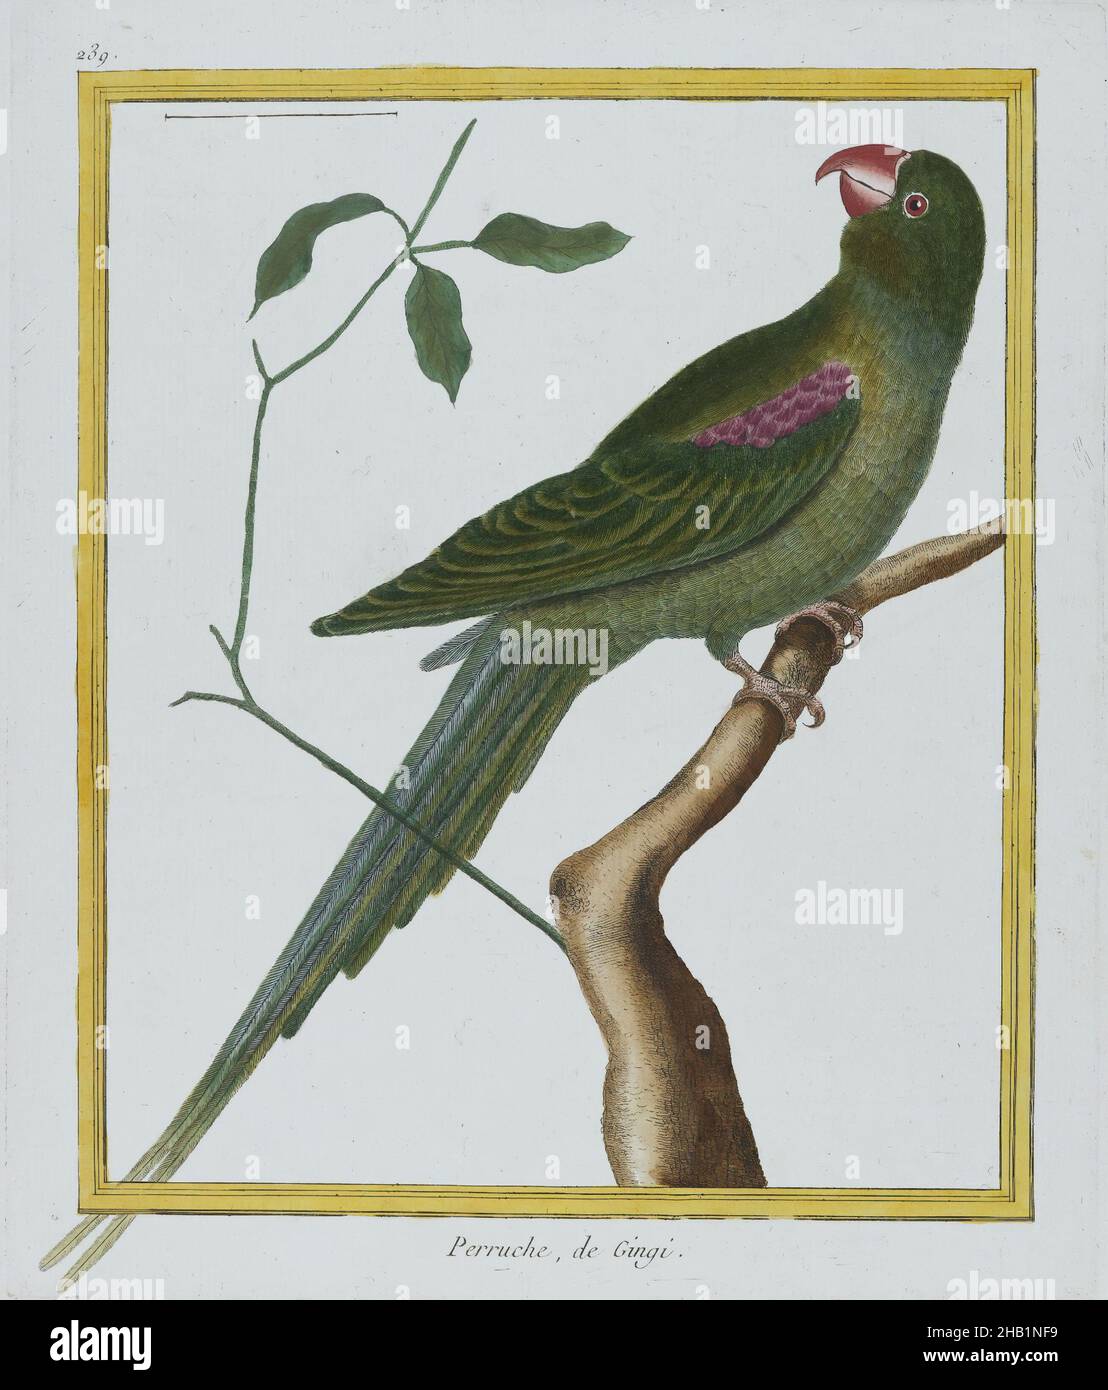 Peruche, de Gingi, François-Nicolas Martinet, French, 1739-after 1796, Hand-colored engraving, 1770-1786, sheet: 12 7/16 x 9 in., 31.6 x 22.9 cm, 18th Century, bird, green, parrot, tree Stock Photo